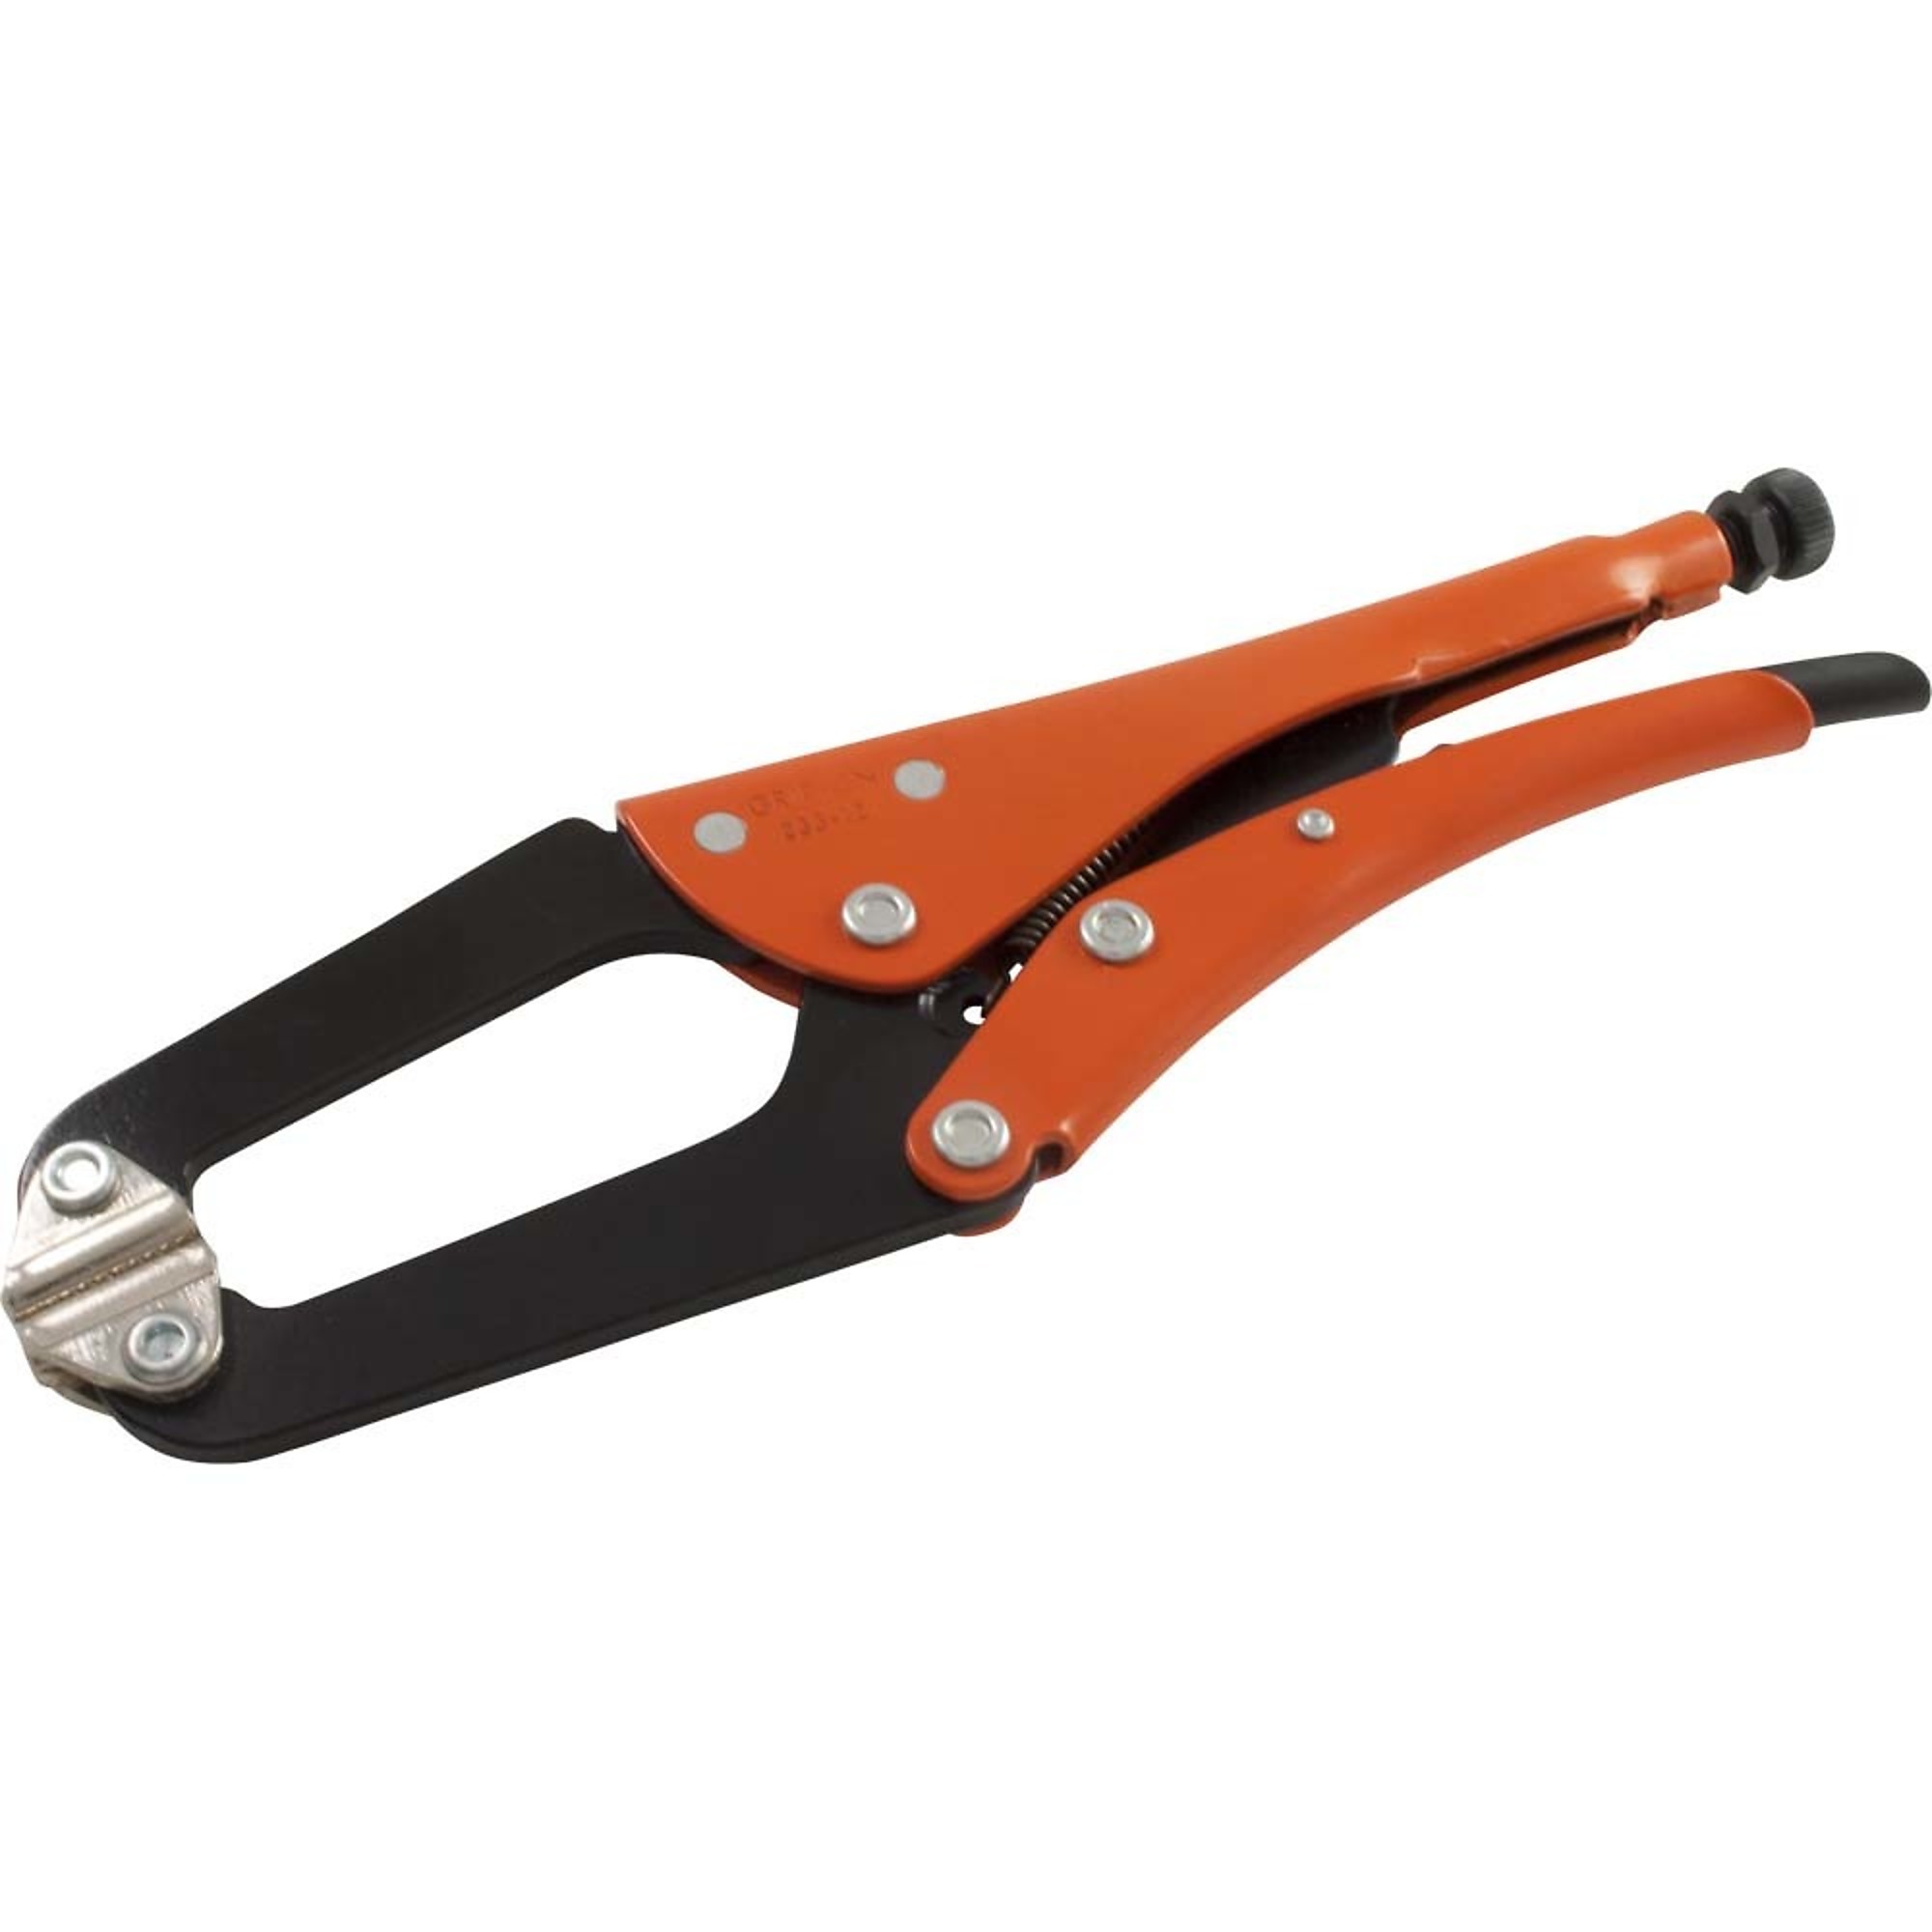 Grip-on, 10Inch Locking C-clamp Plier, Pieces (qty.) 1 Material Alloy Steel, Jaw Capacity 1.77 in, Model 233-10